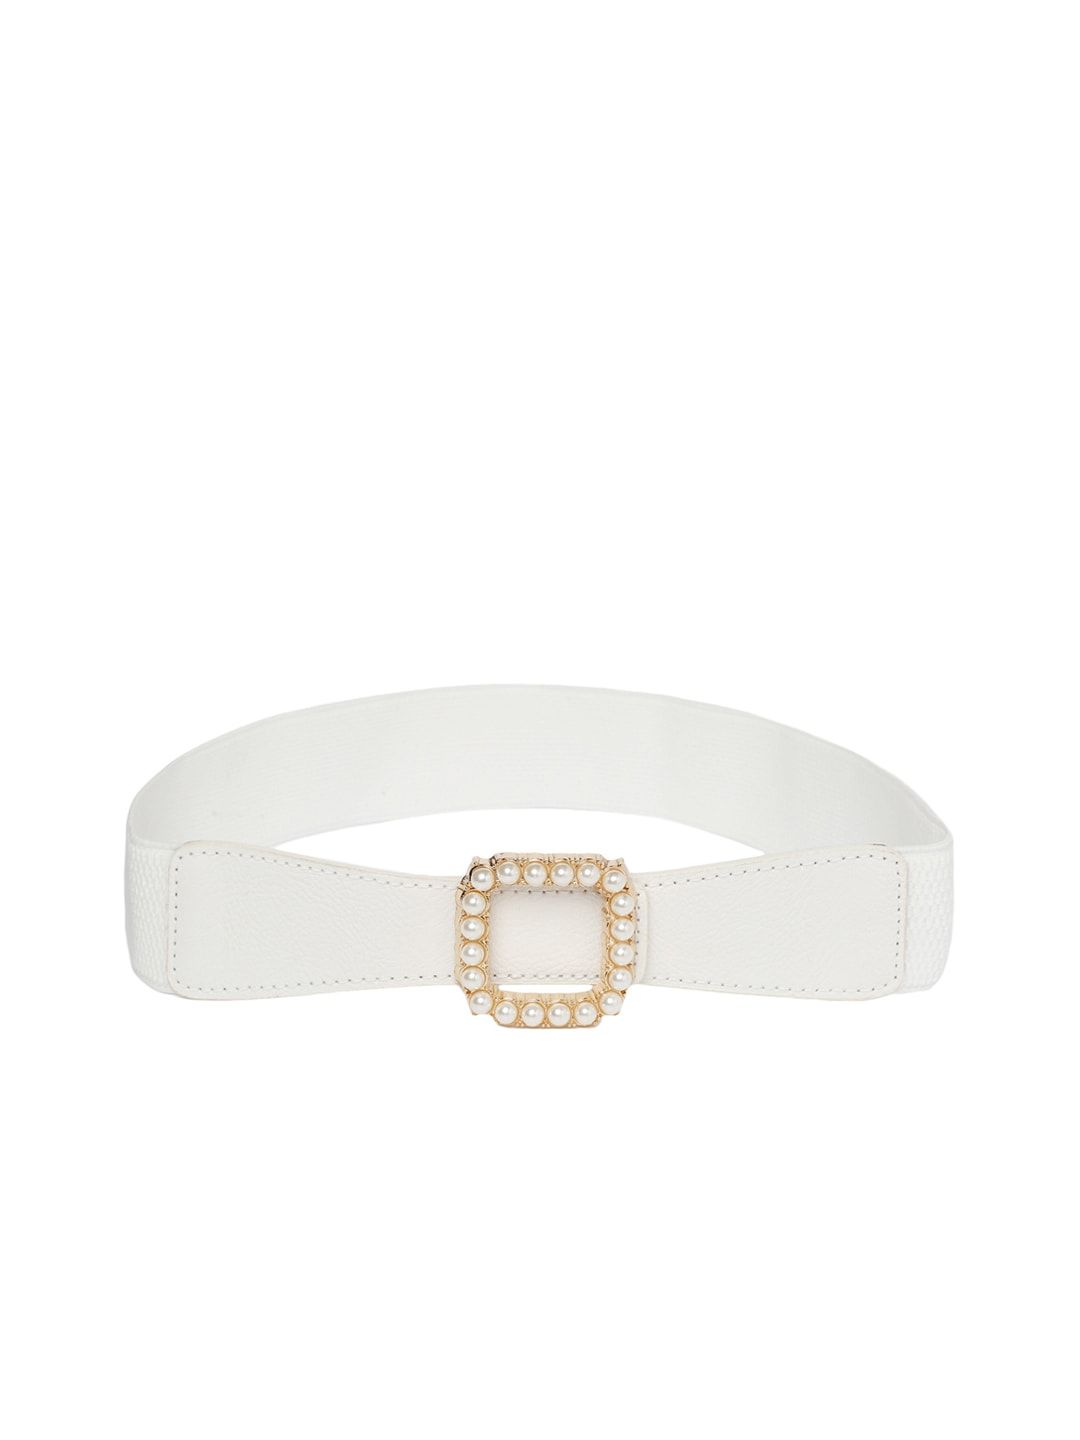 CRUSSET Women White Solid Belt Price in India